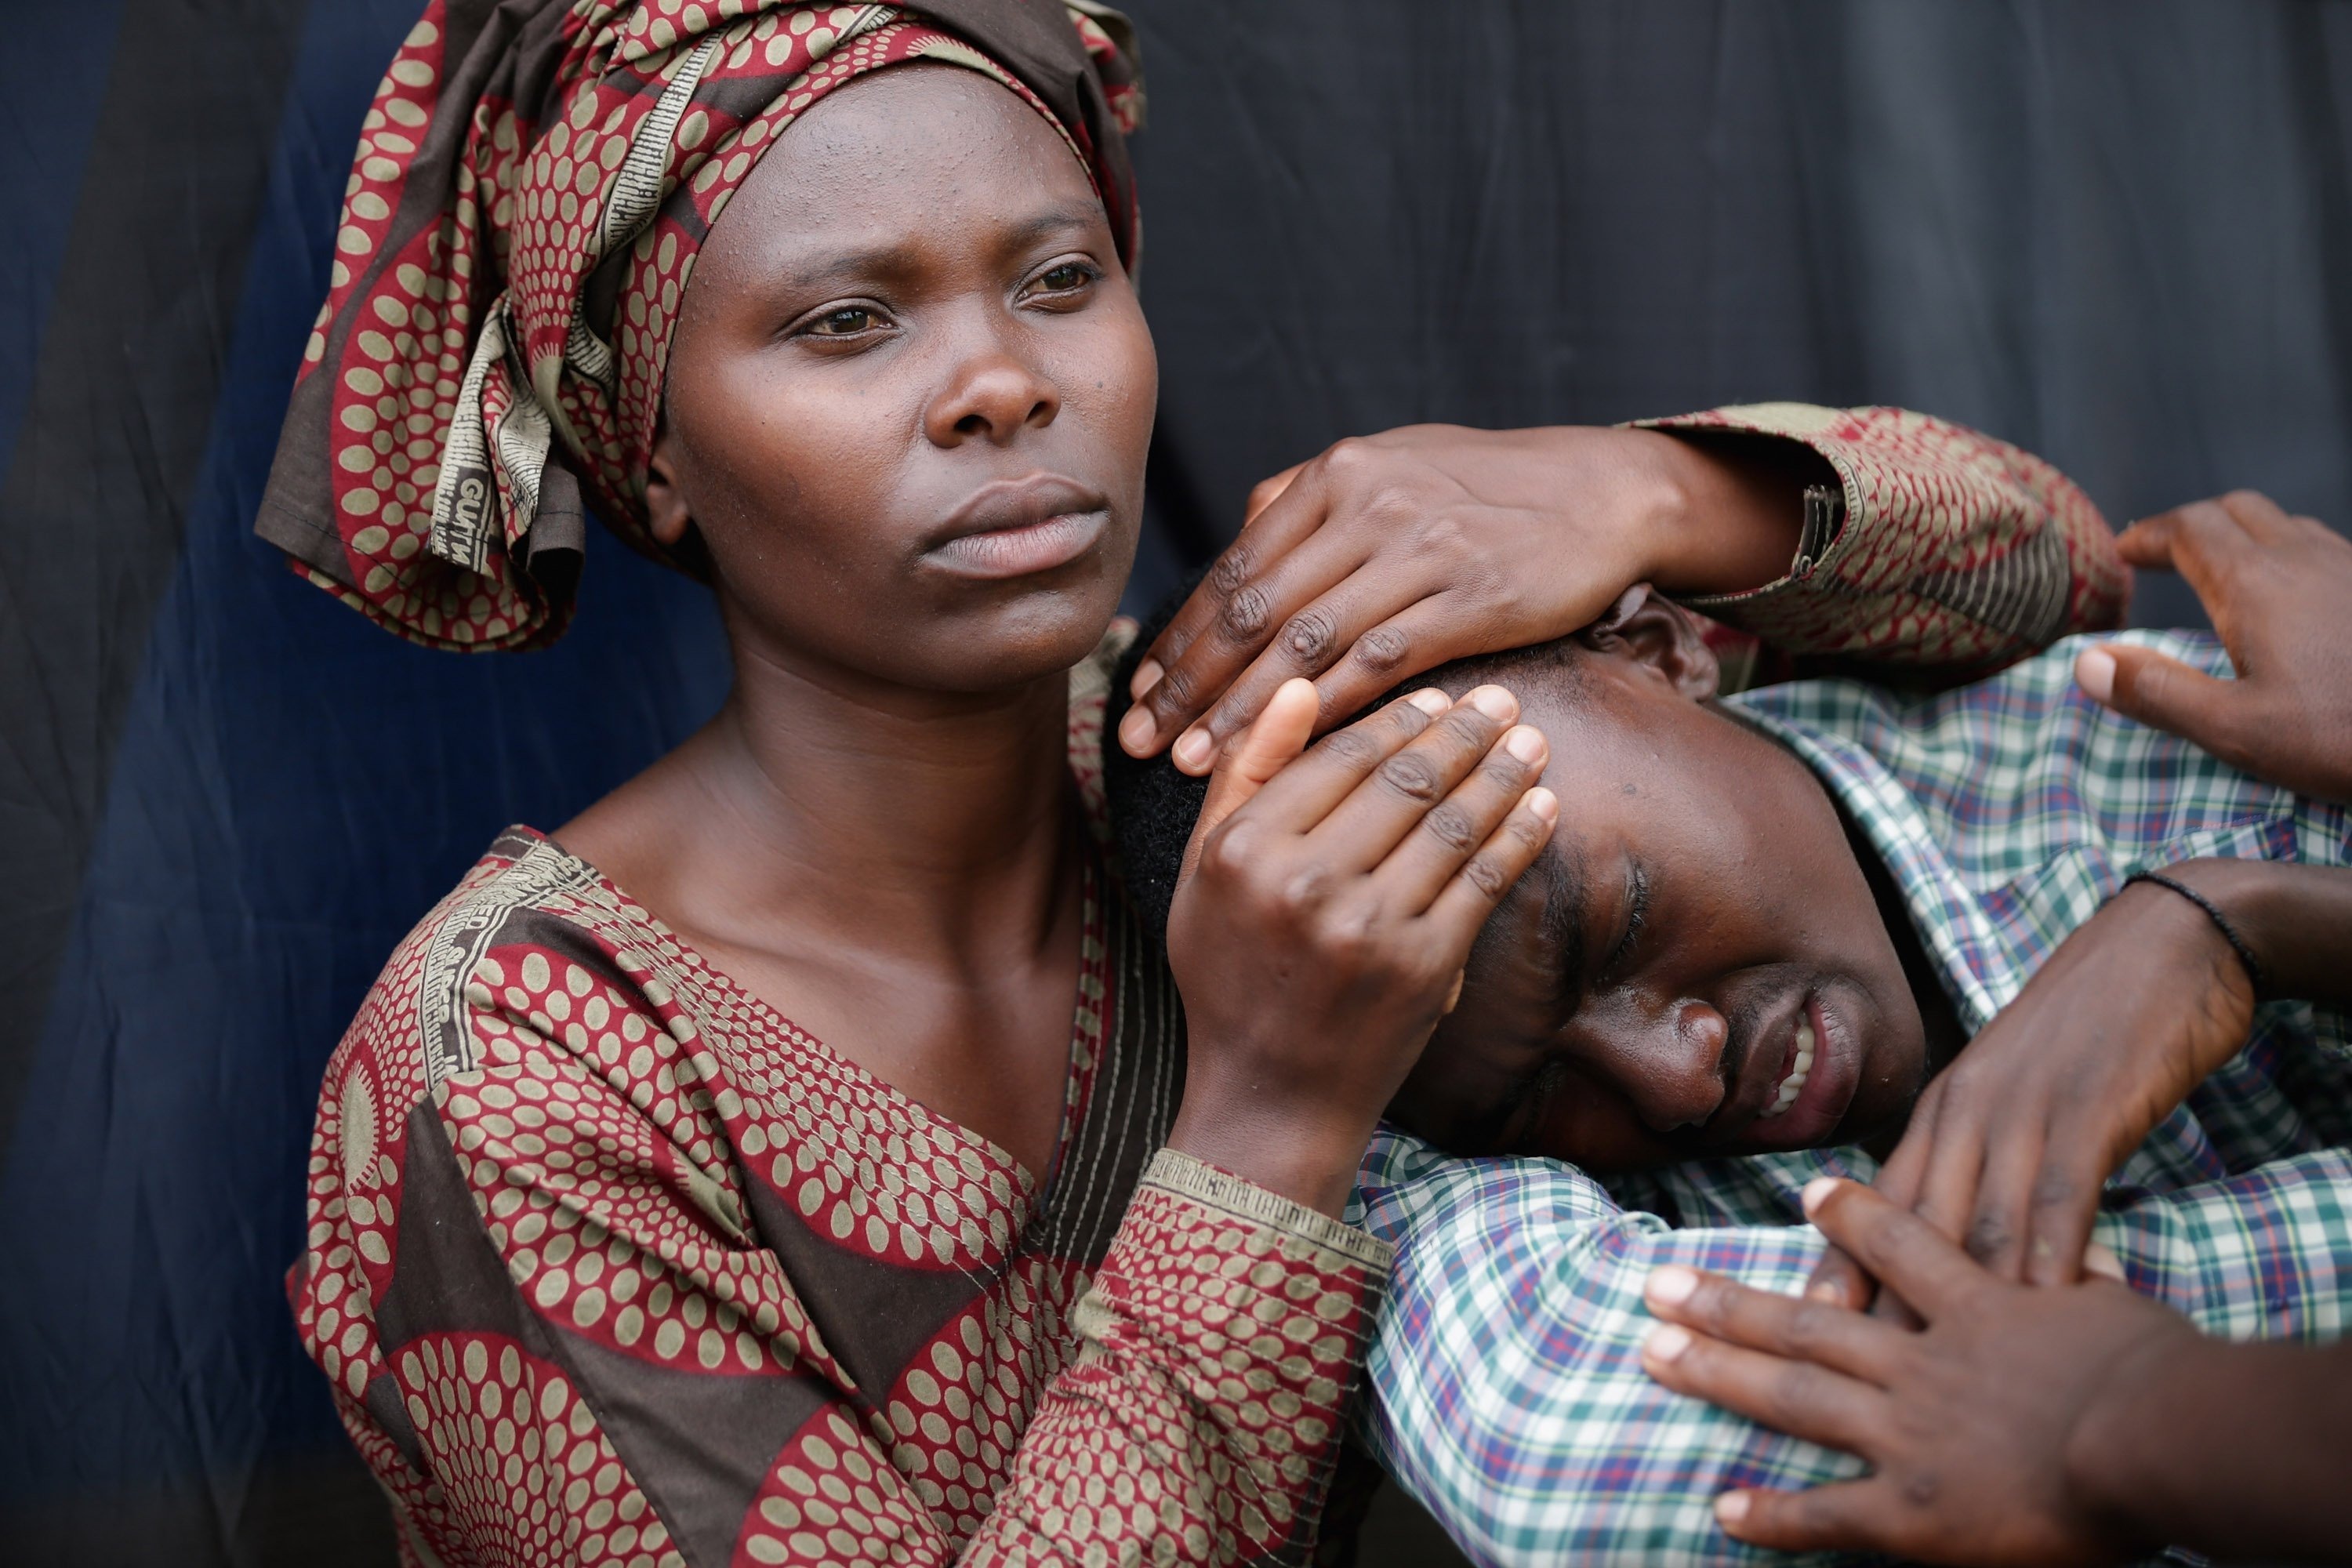 Rwandans impacted by the genocide comfort each other during a commemoration ceremony in Kigali, on April 7. (Chip Somodevilla—Getty Images)